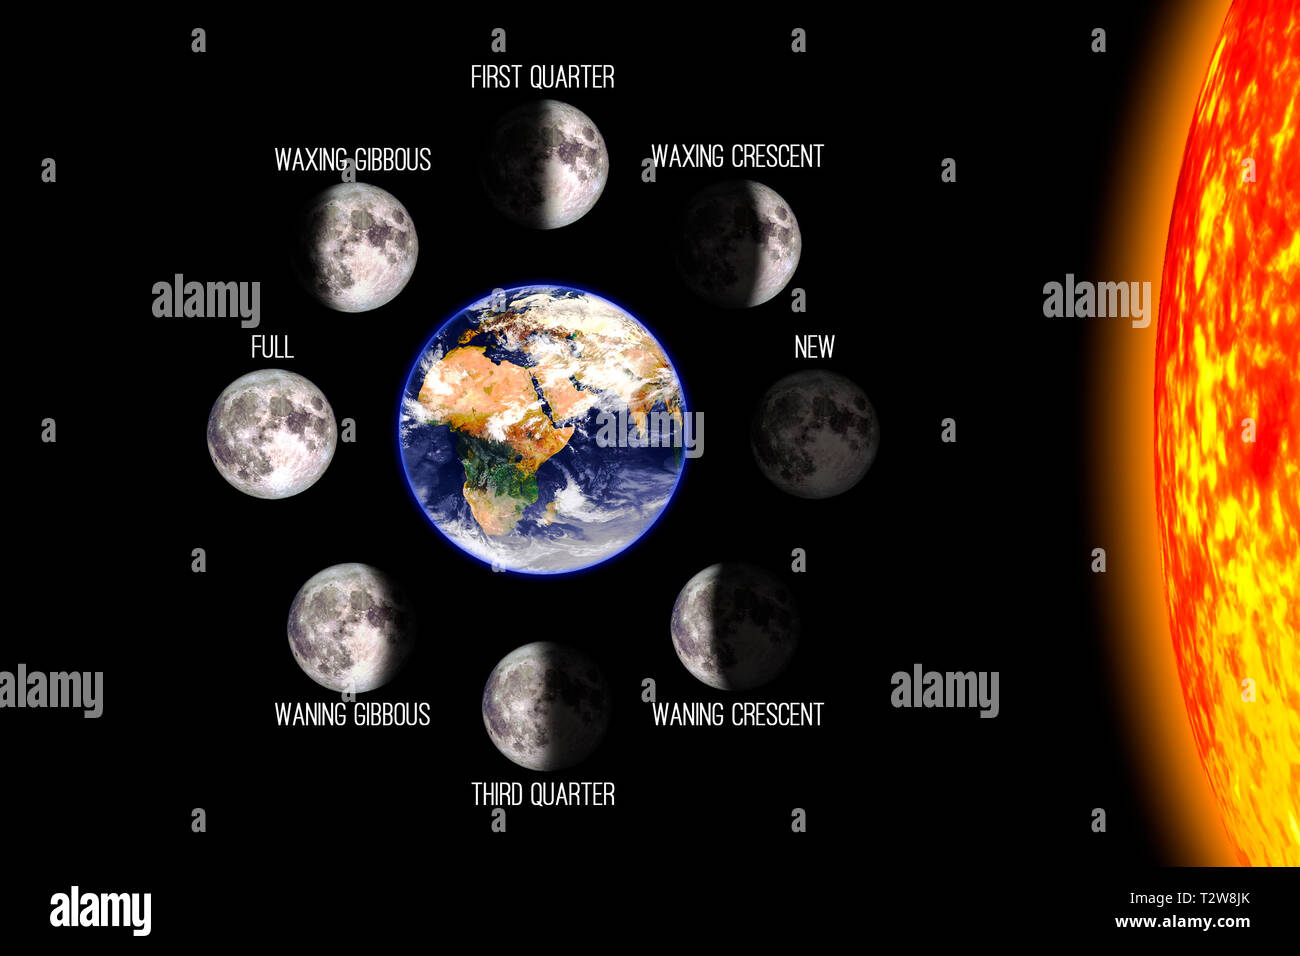 examples of goldenratio earth moon